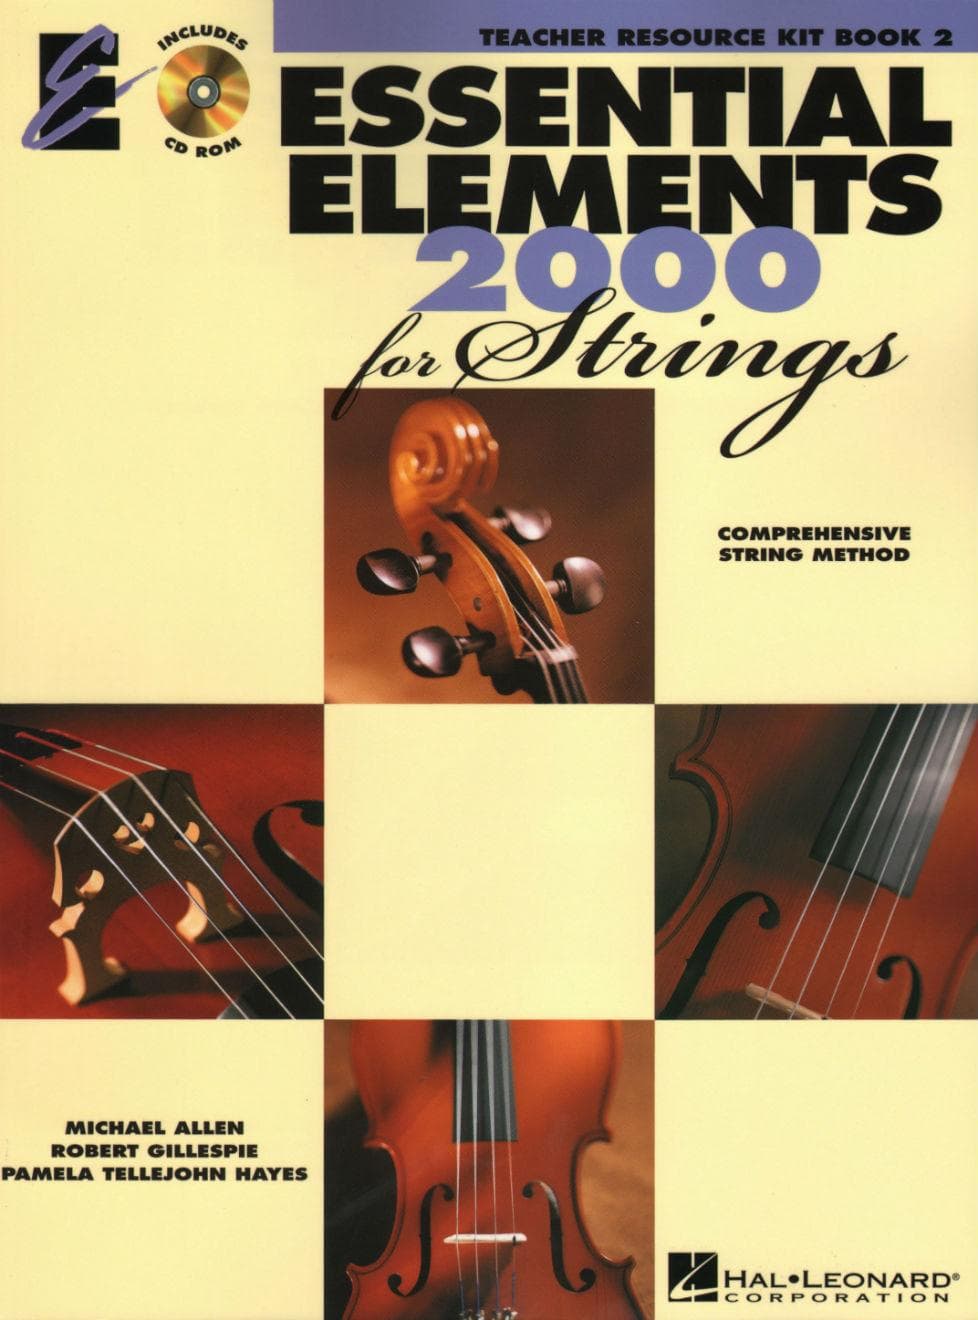 Essential Elements 2000 for Strings - Teacher Resource Kit Book 2 - with CD - by Allen/Gillespie/Hayes - Hal Leonard Publication